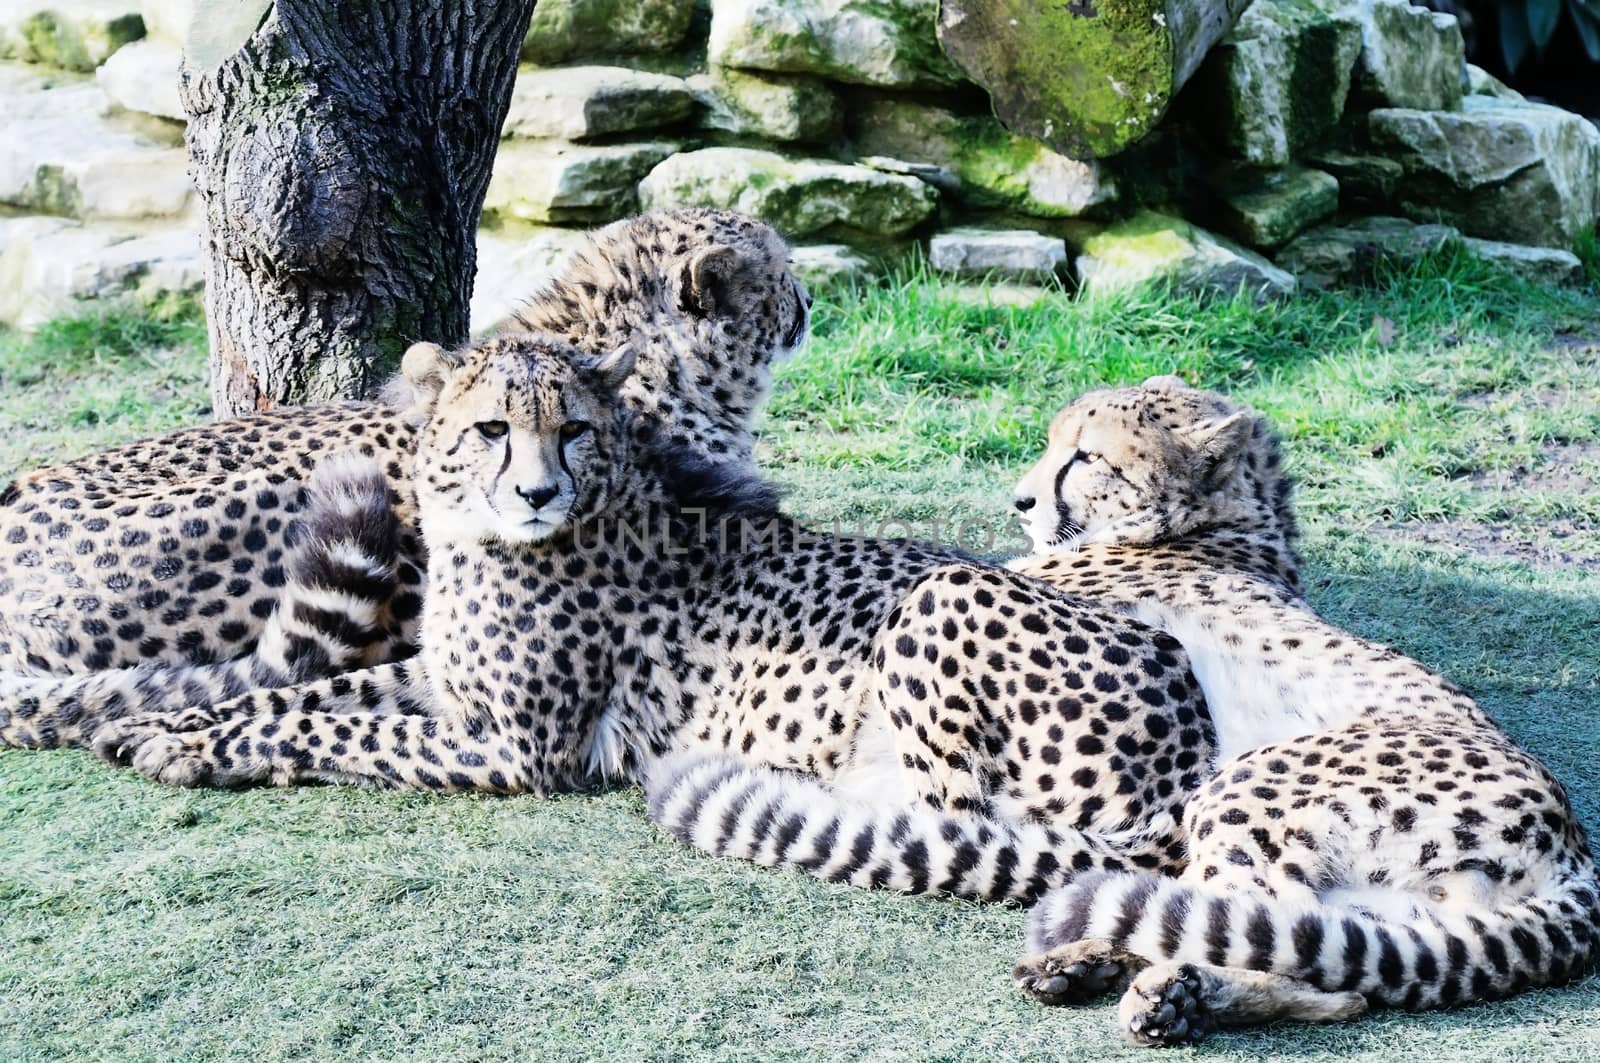 Cheetahs in the sunshine by kmwphotography